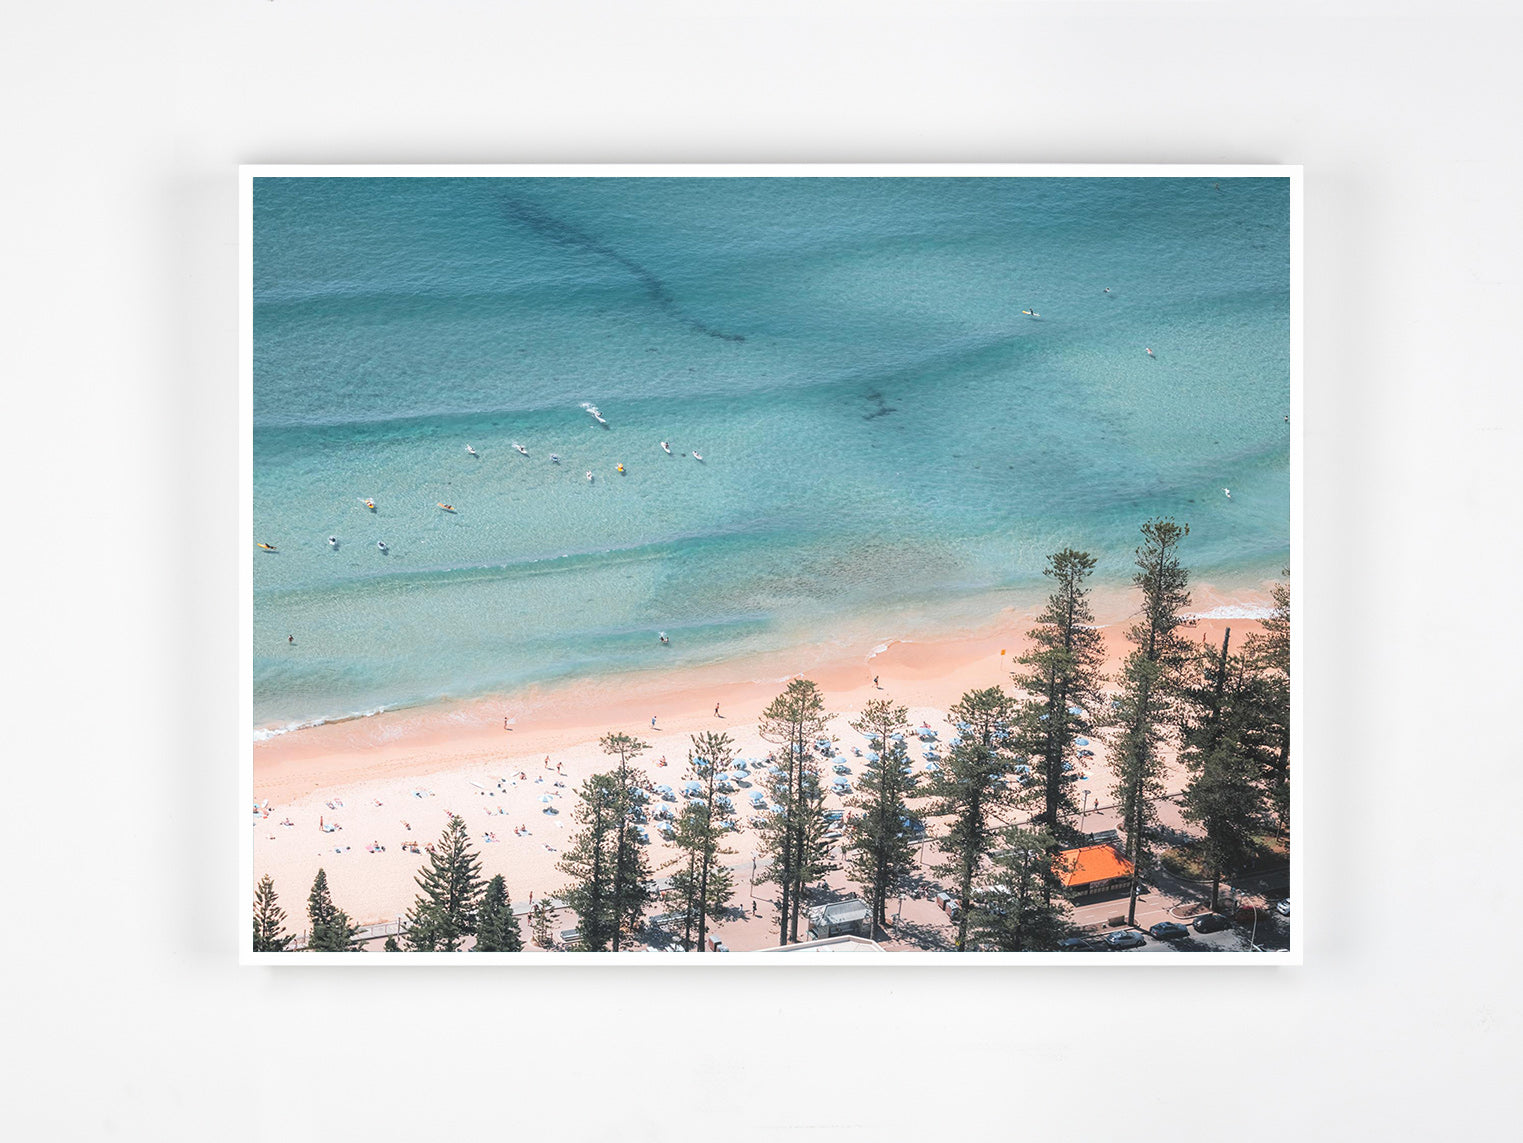 SW1396 - Manly